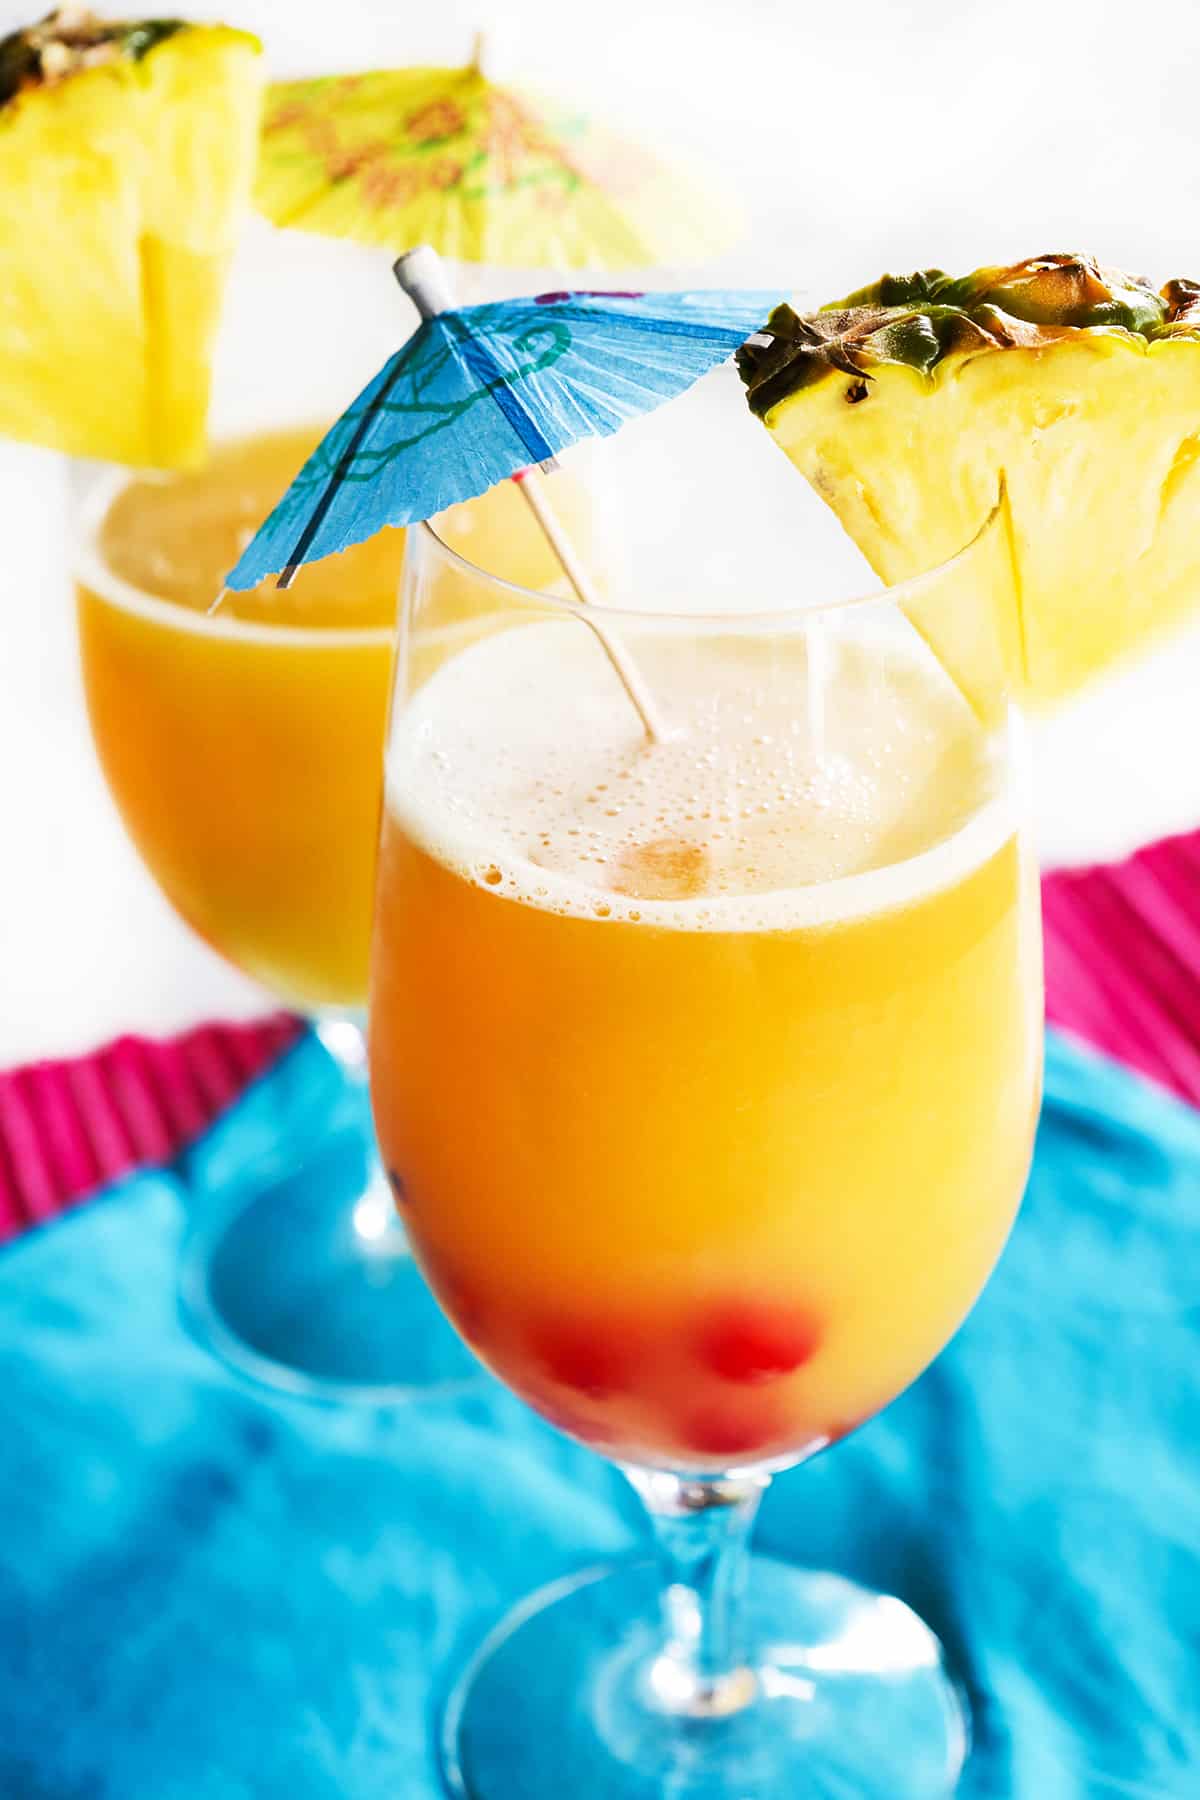 Two glasses of Mai Tais with drink umbrellas and pineapple wedges stuck inside.